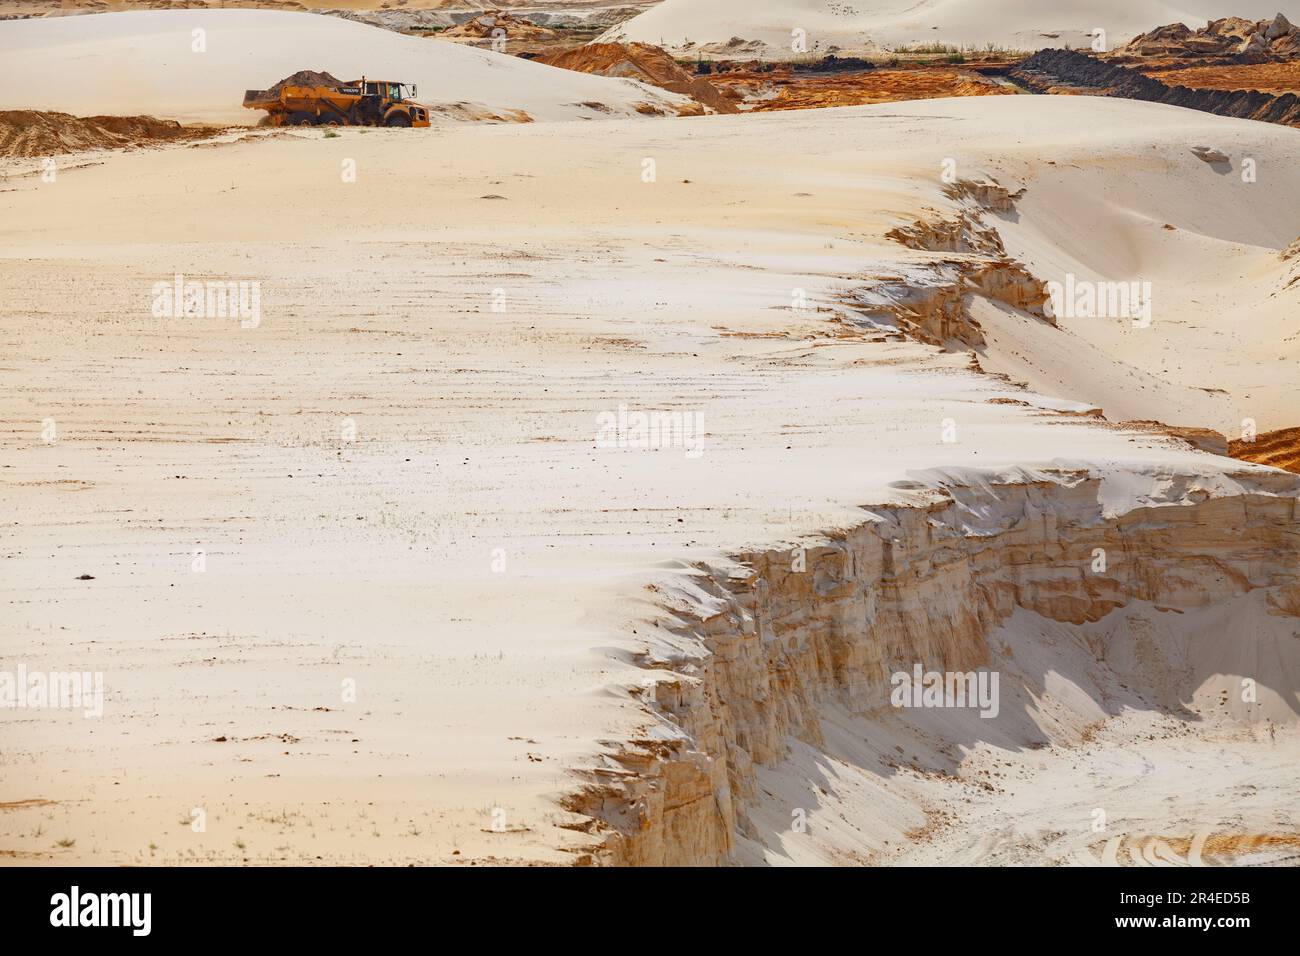 Chulkovo, Moscow province - July 20, 2021: Volvo quarry truck carries ground. Open-pit sand extraction. Stock Photo